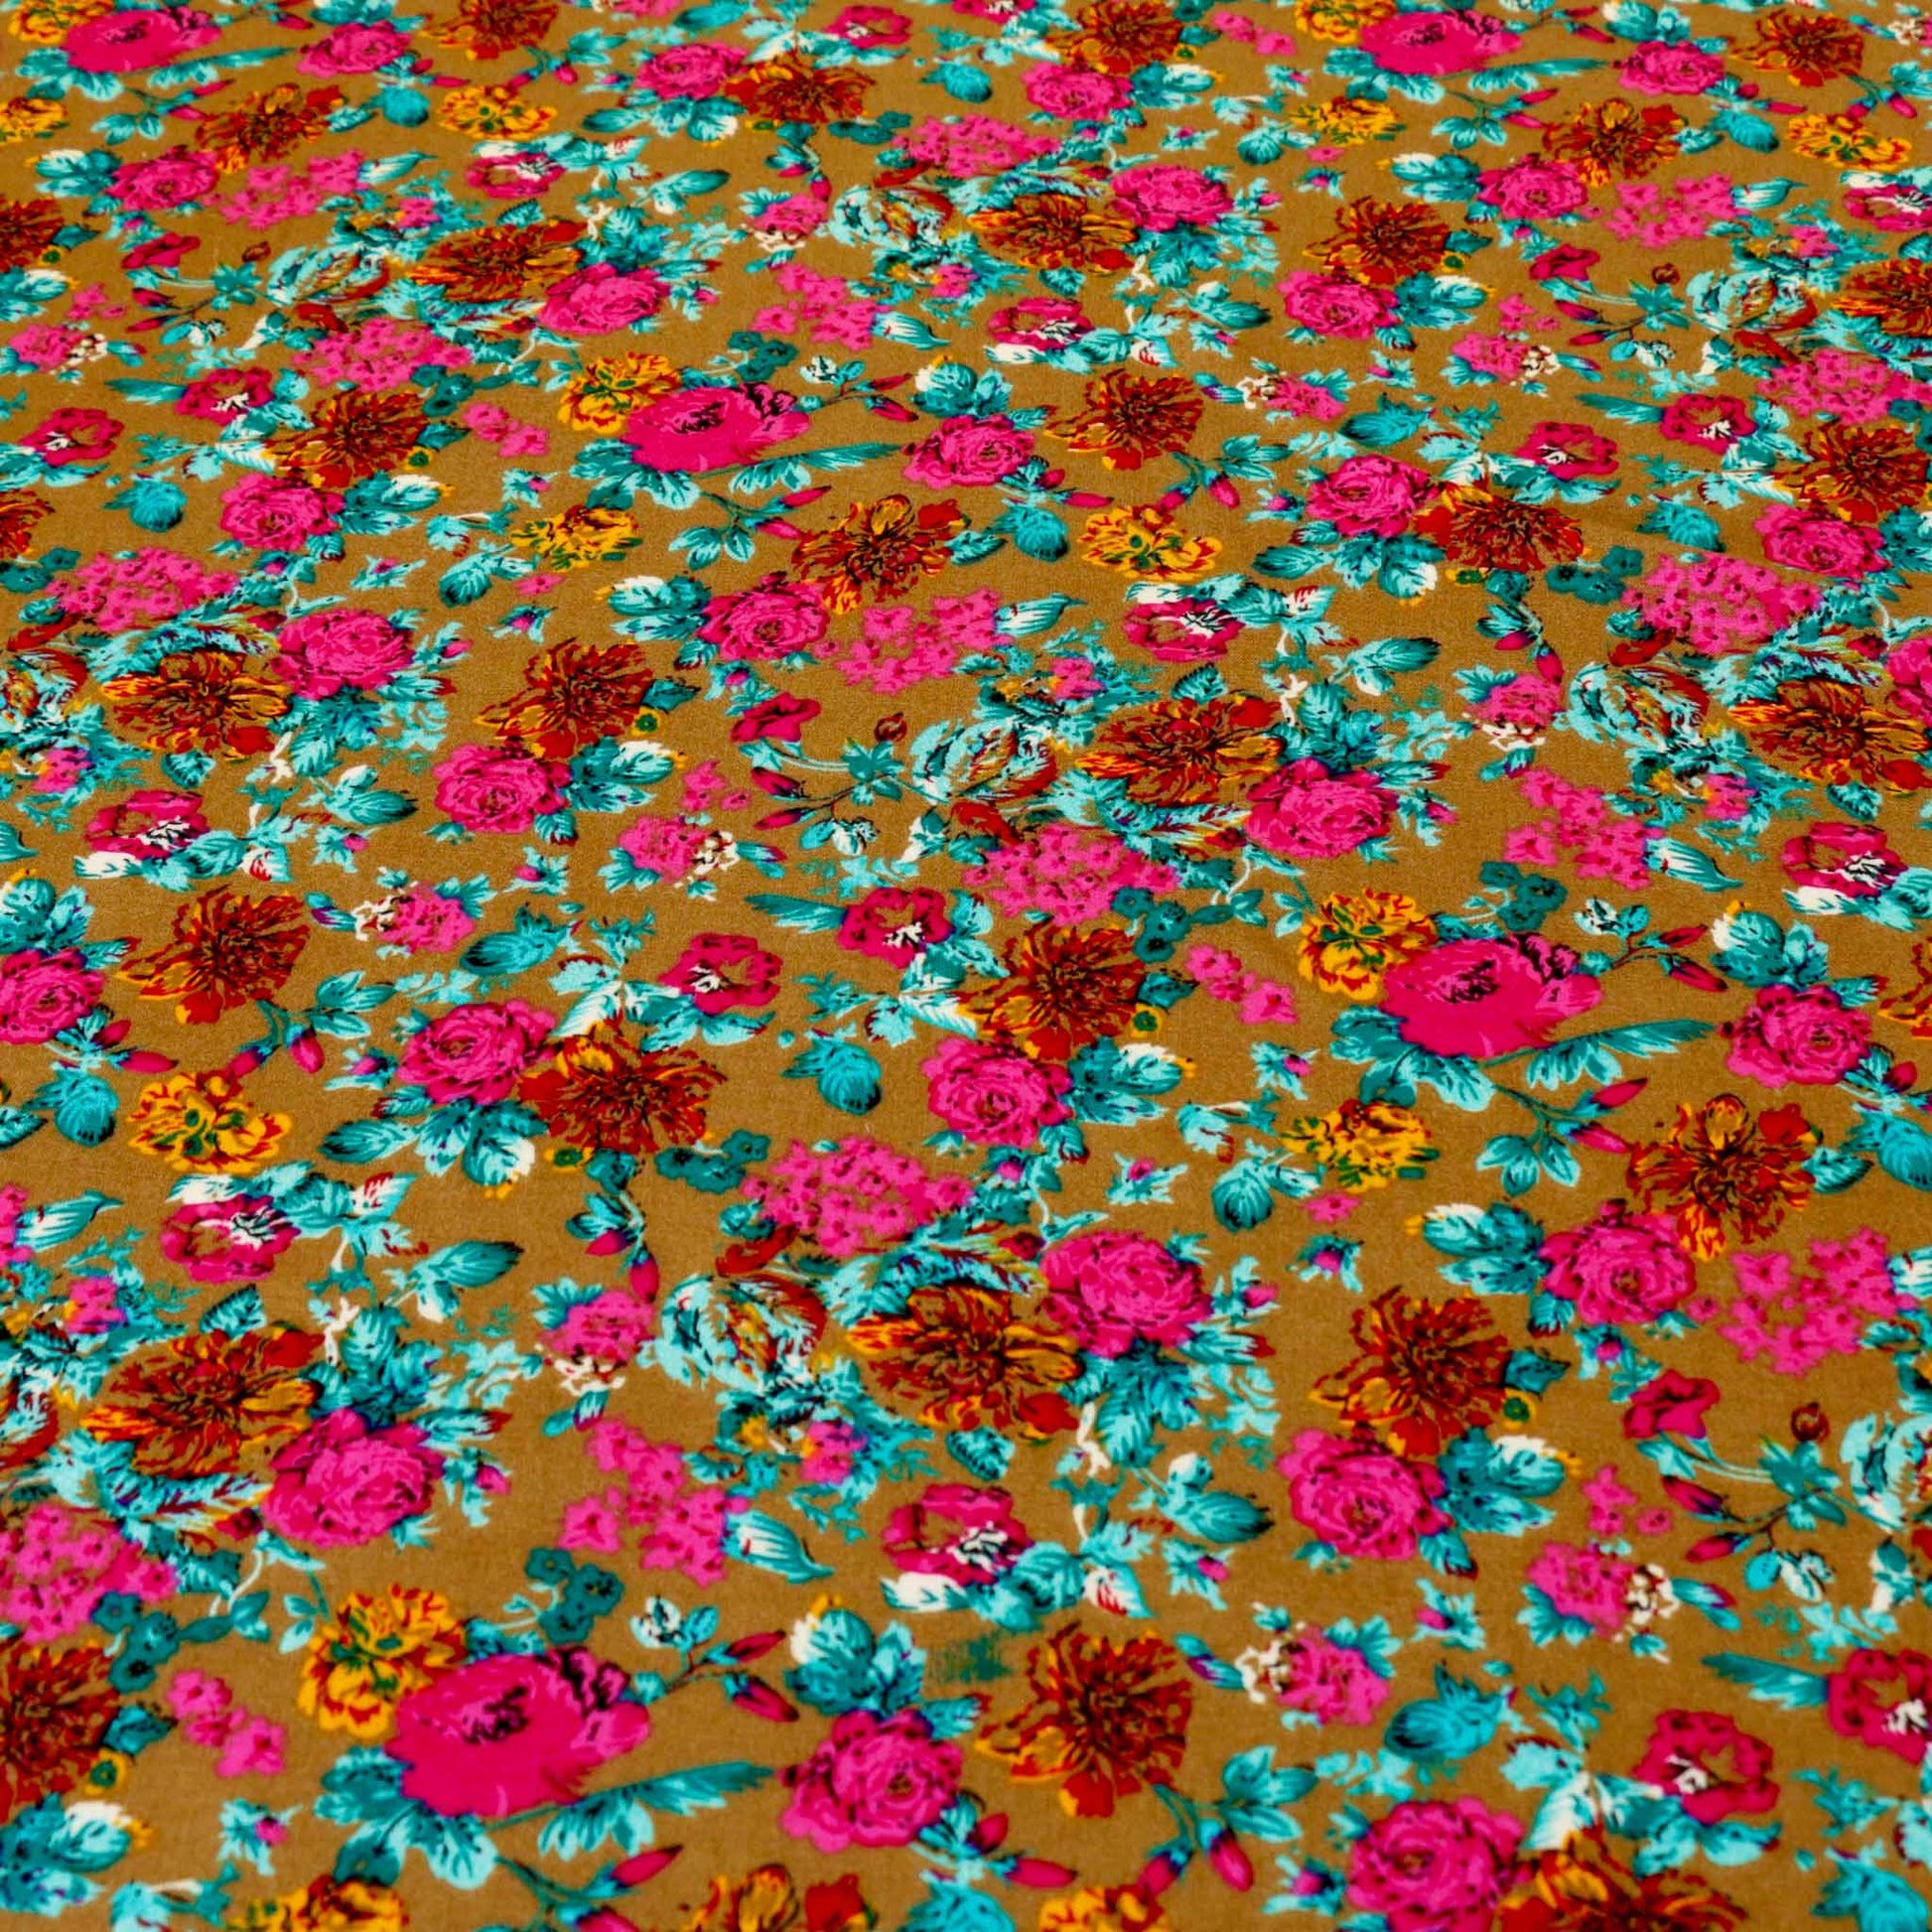 golden viscose rayon challis dressmaking fabric with blue and pink floral design print